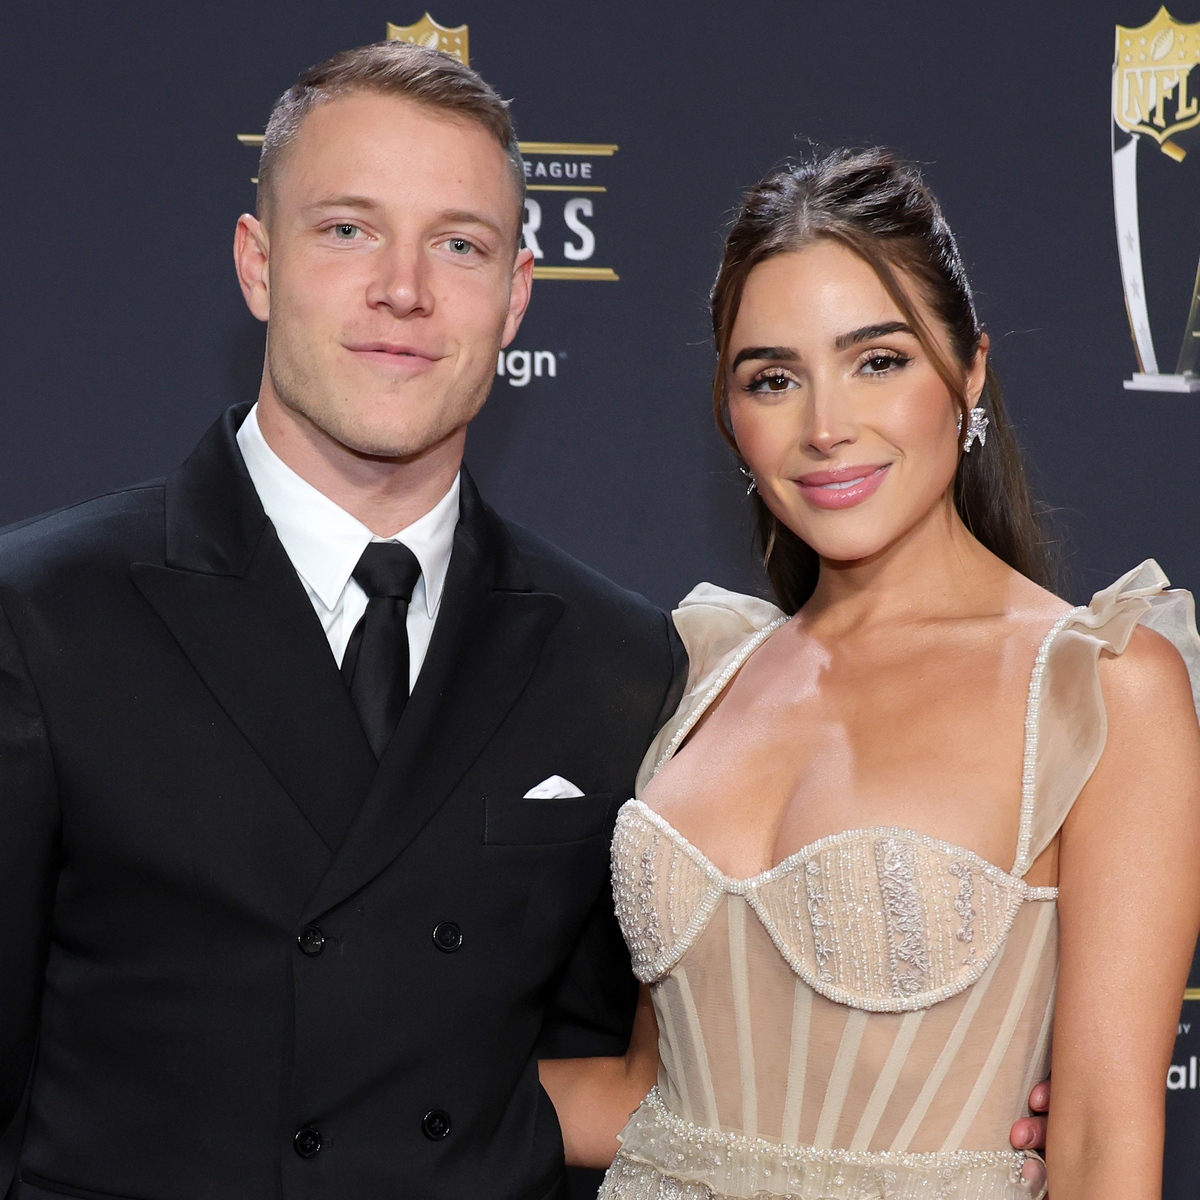 How Olivia Culpo Is Switching Up Her Wellness Routine Ahead of Christian McCaffrey Wedding